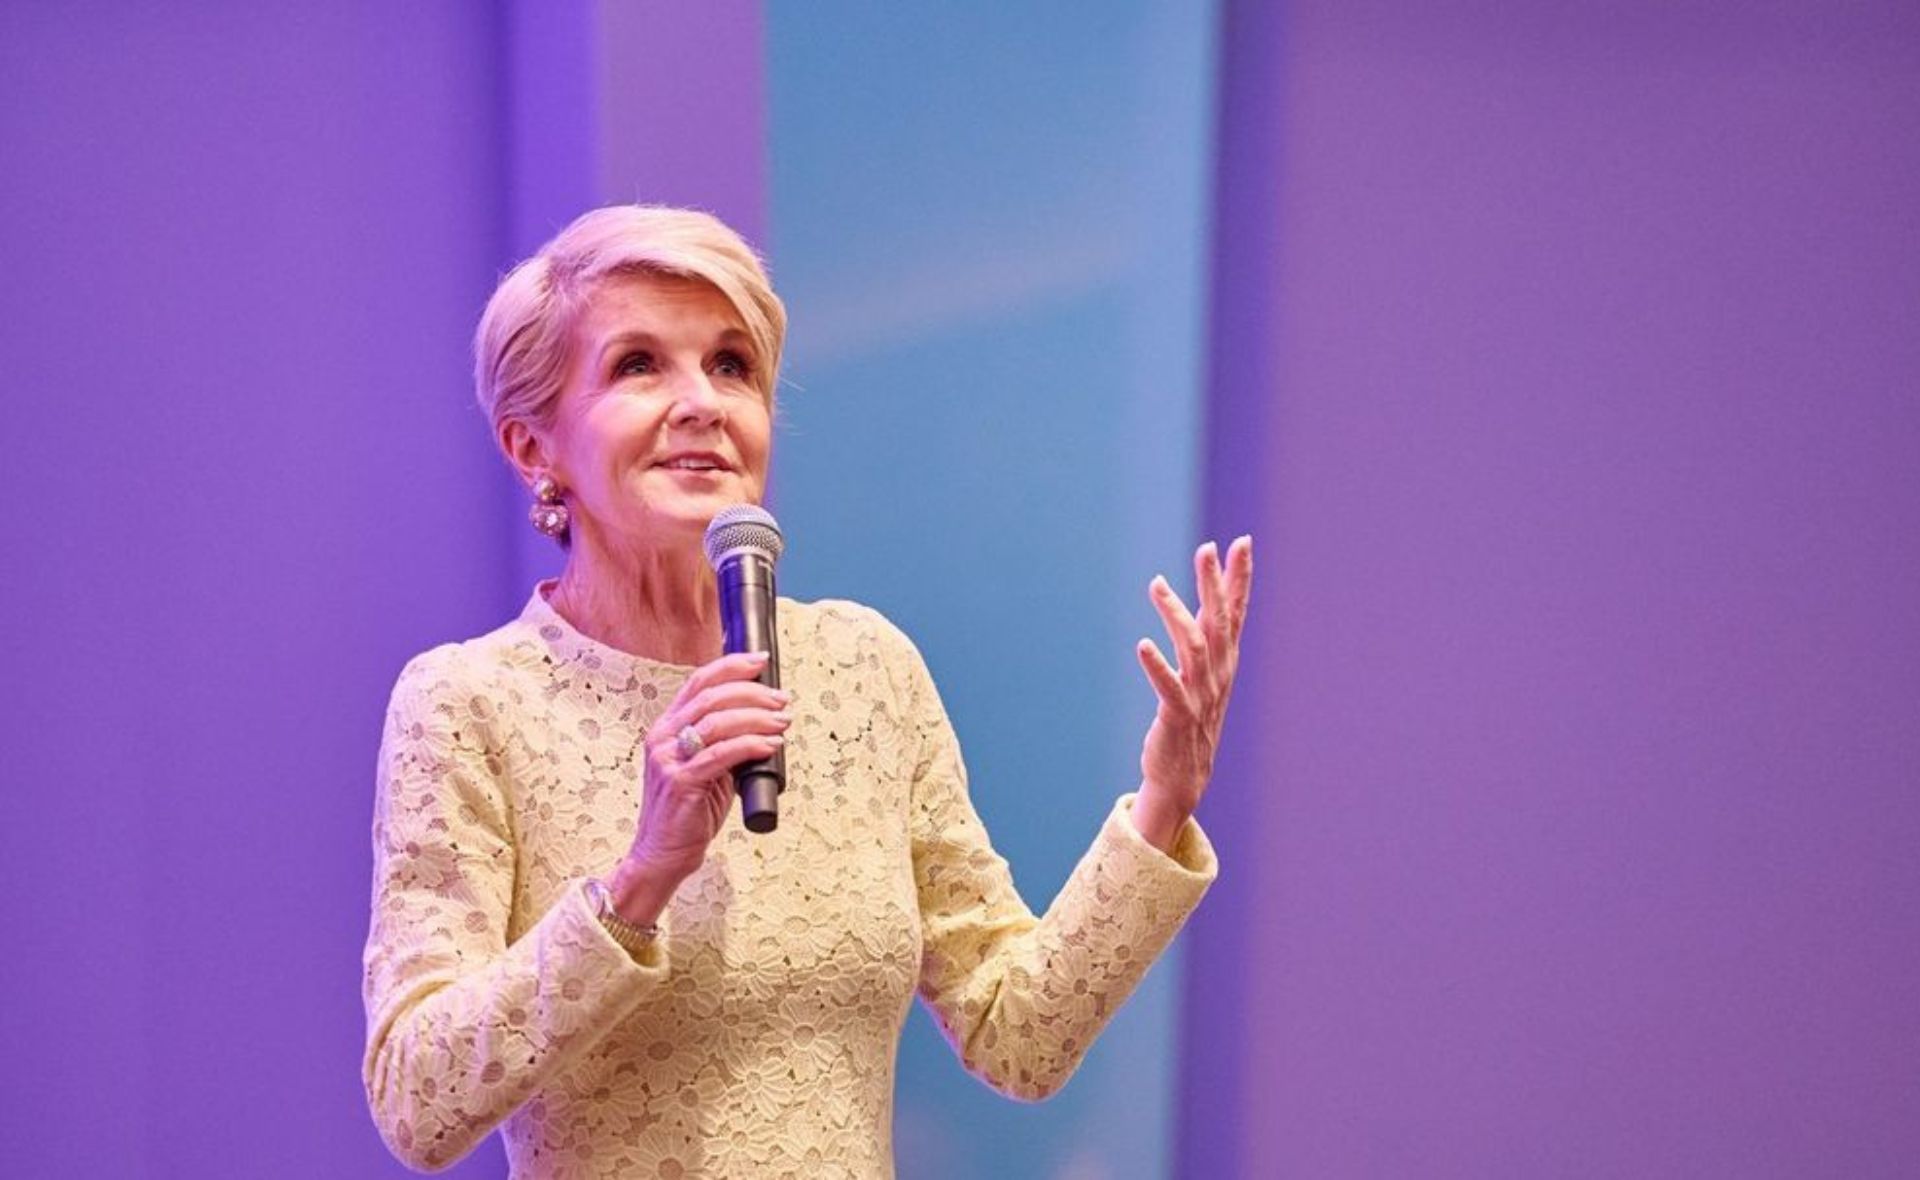 “I’m loving your new look”: Julie Bishop delights fans with “elegant” new appearance at special event